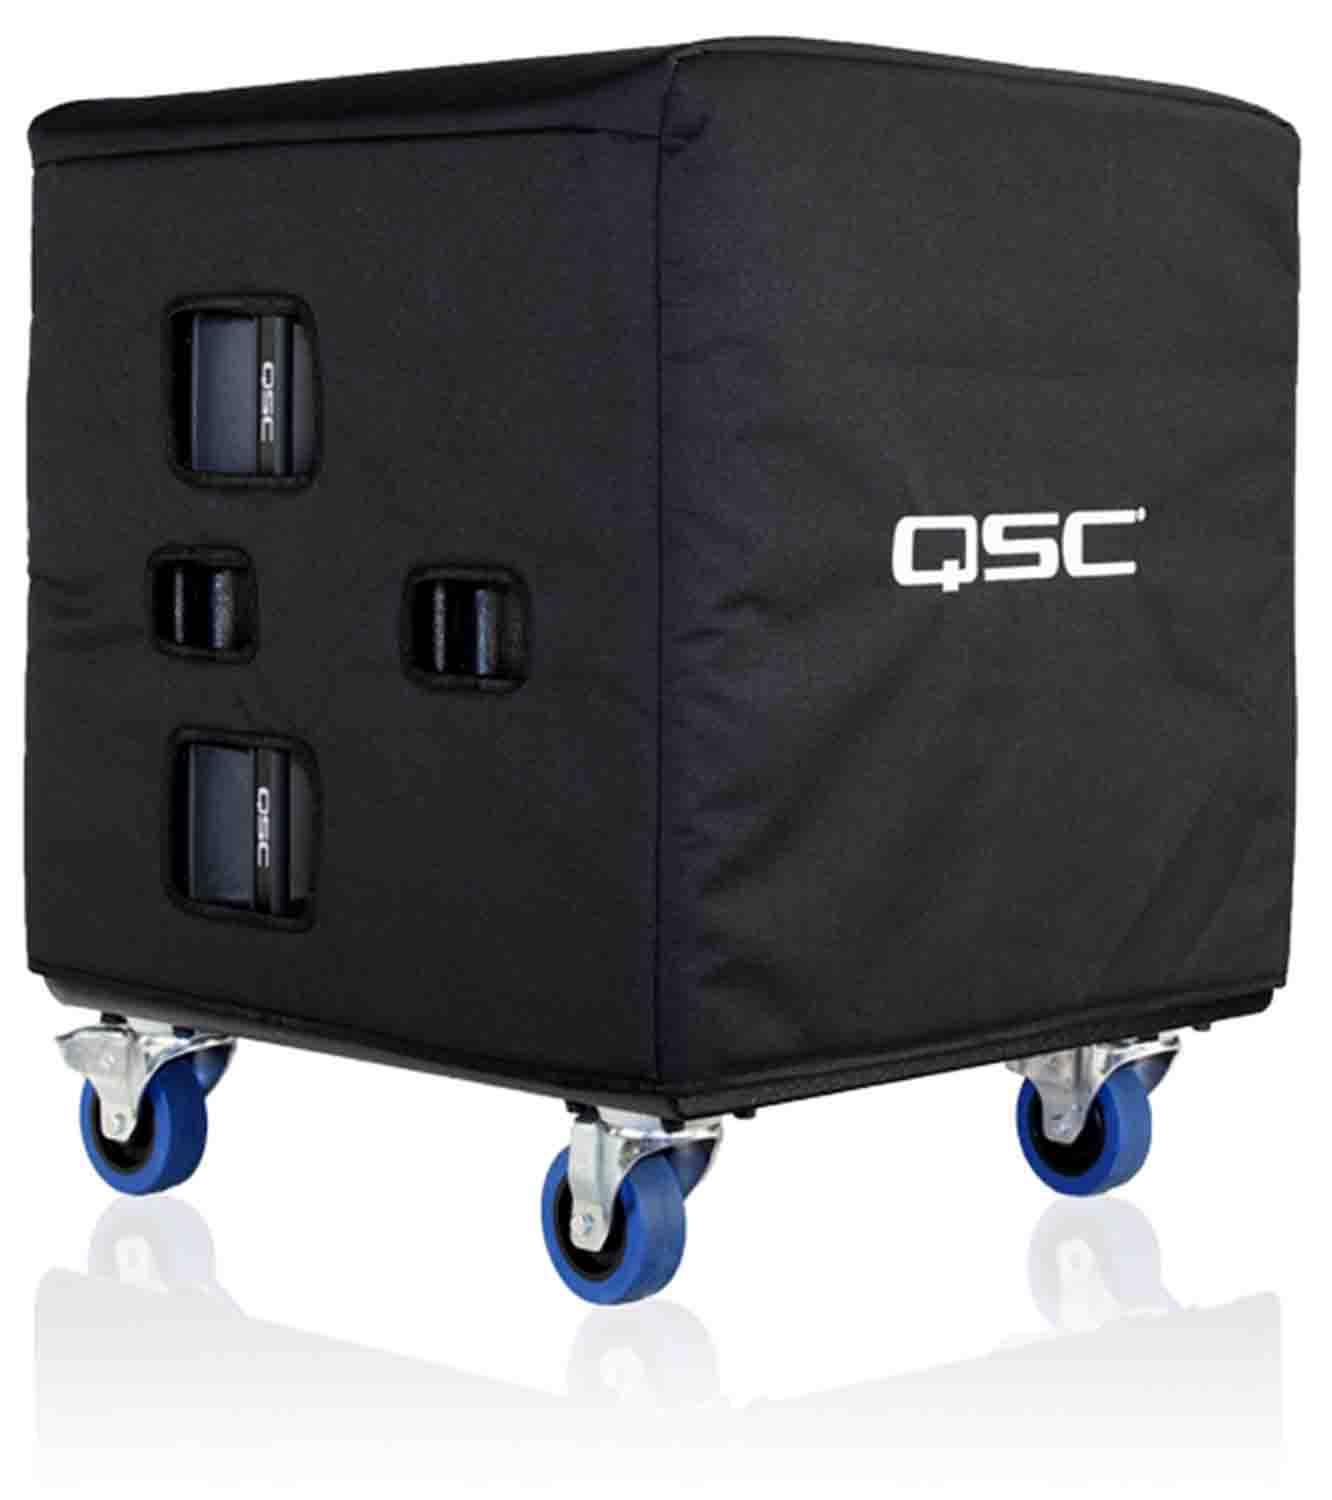 QSC E118sw, 18 inches Externally Powered Loud Speakers, Live Sound Reinforcement Subwoofer - Black - Hollywood DJ